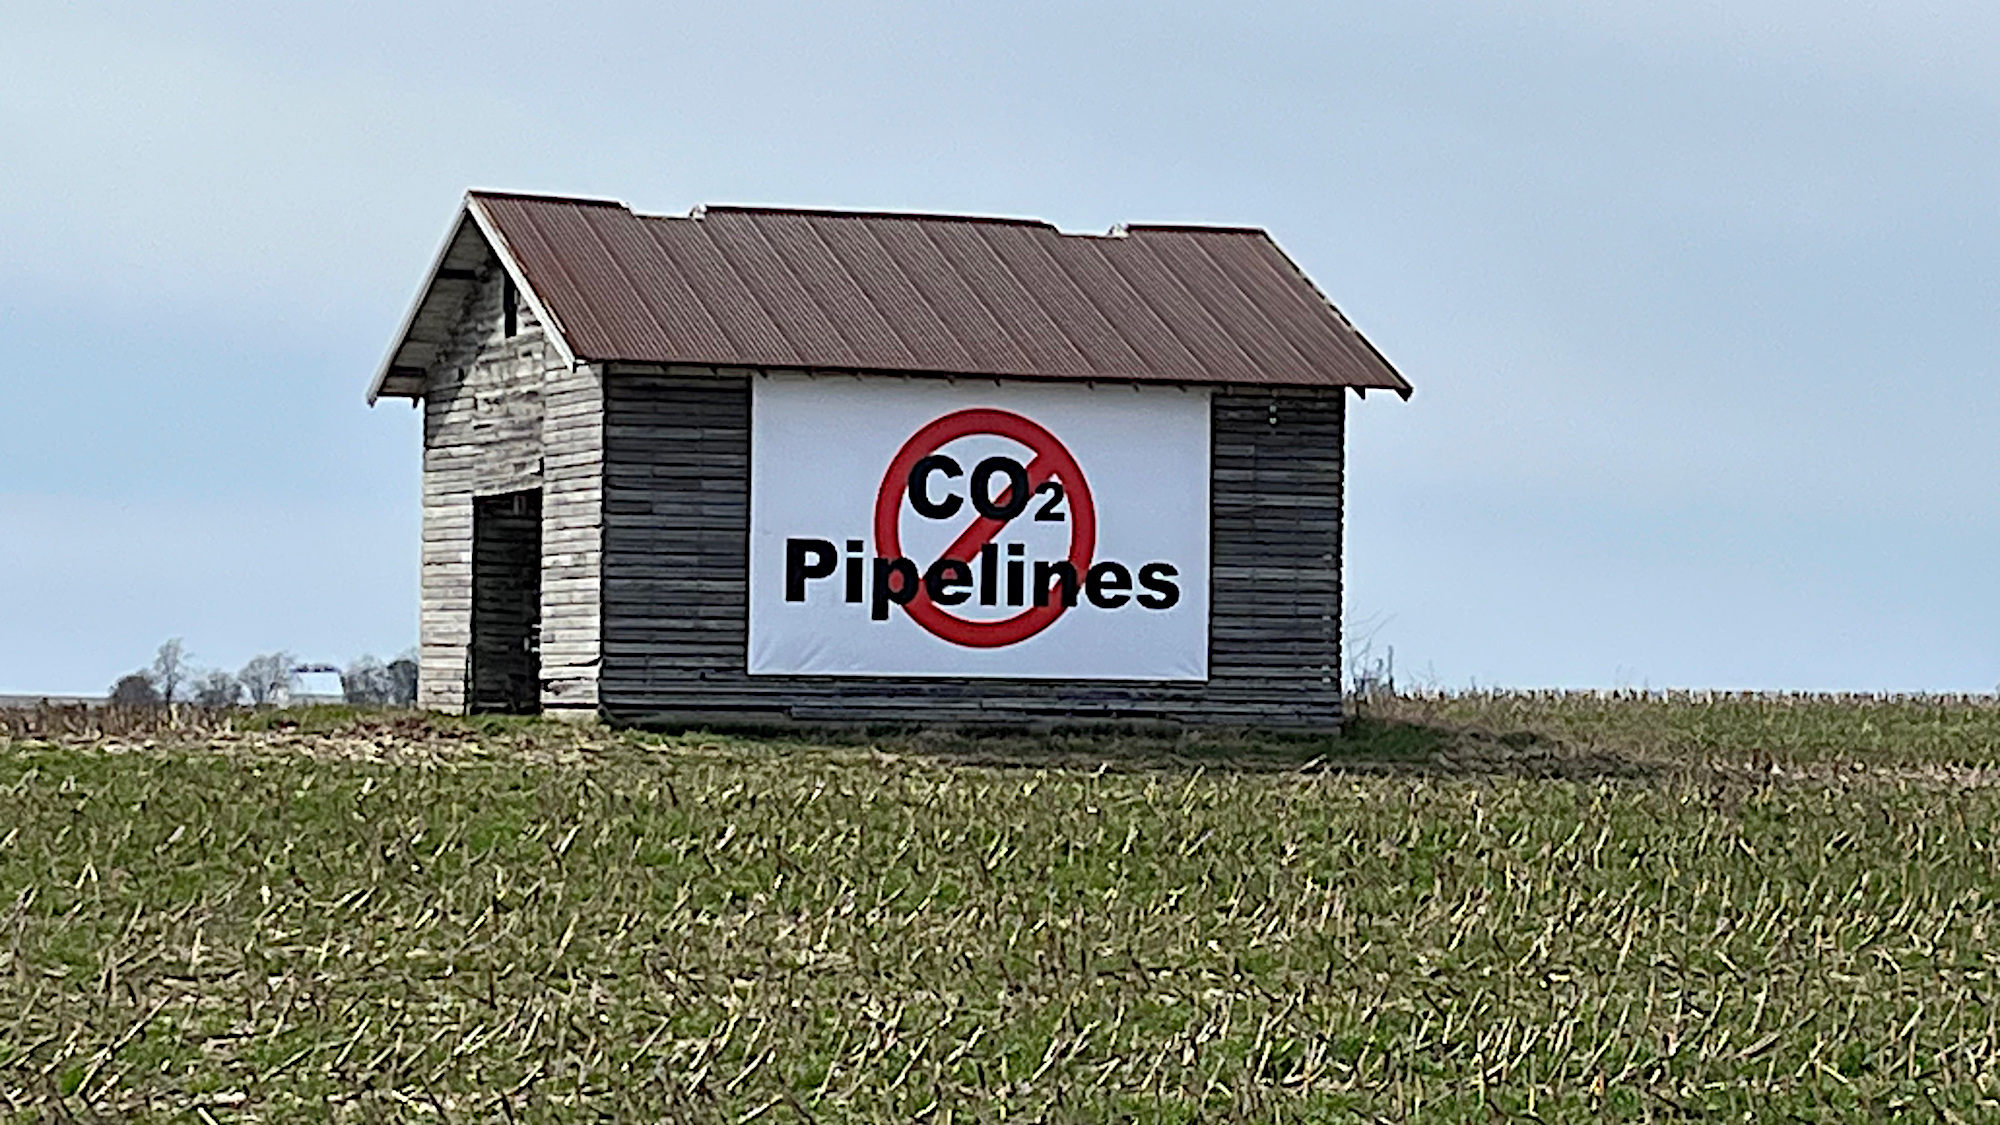 A banner with the words CO2 Pipelines and a red slash hangs from a barn in a cornfield